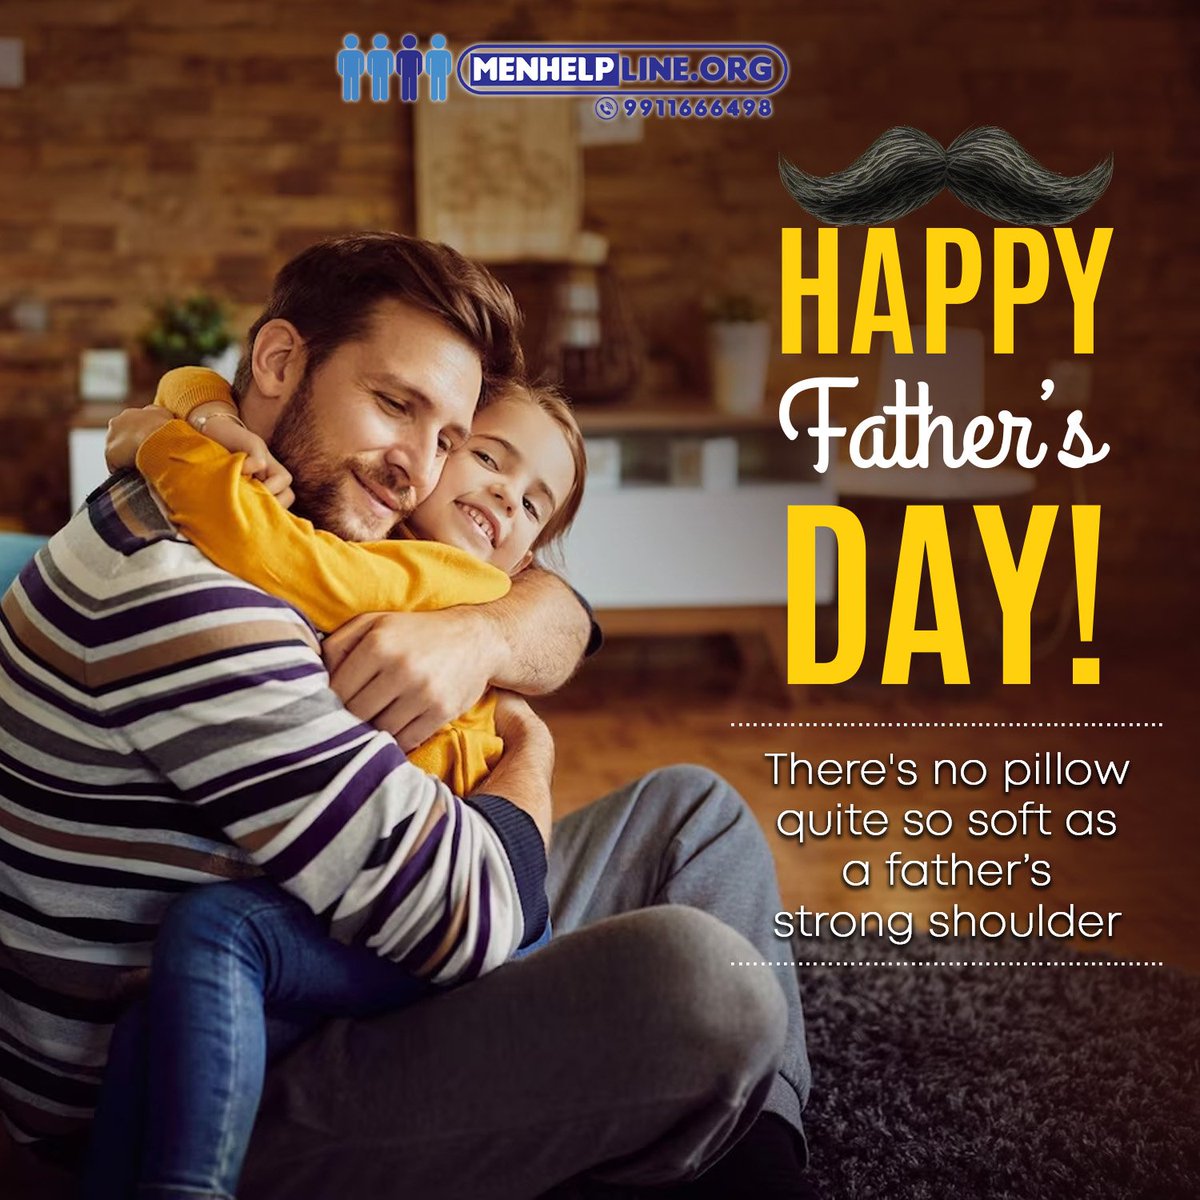 Feel the magical word 'Father'. Without him we would not have been so perfect, we would not have been who we are.

#happyfathersday2023 #FathersDay #HappyFathersDay #fathersdayweekend #FathersDay2023